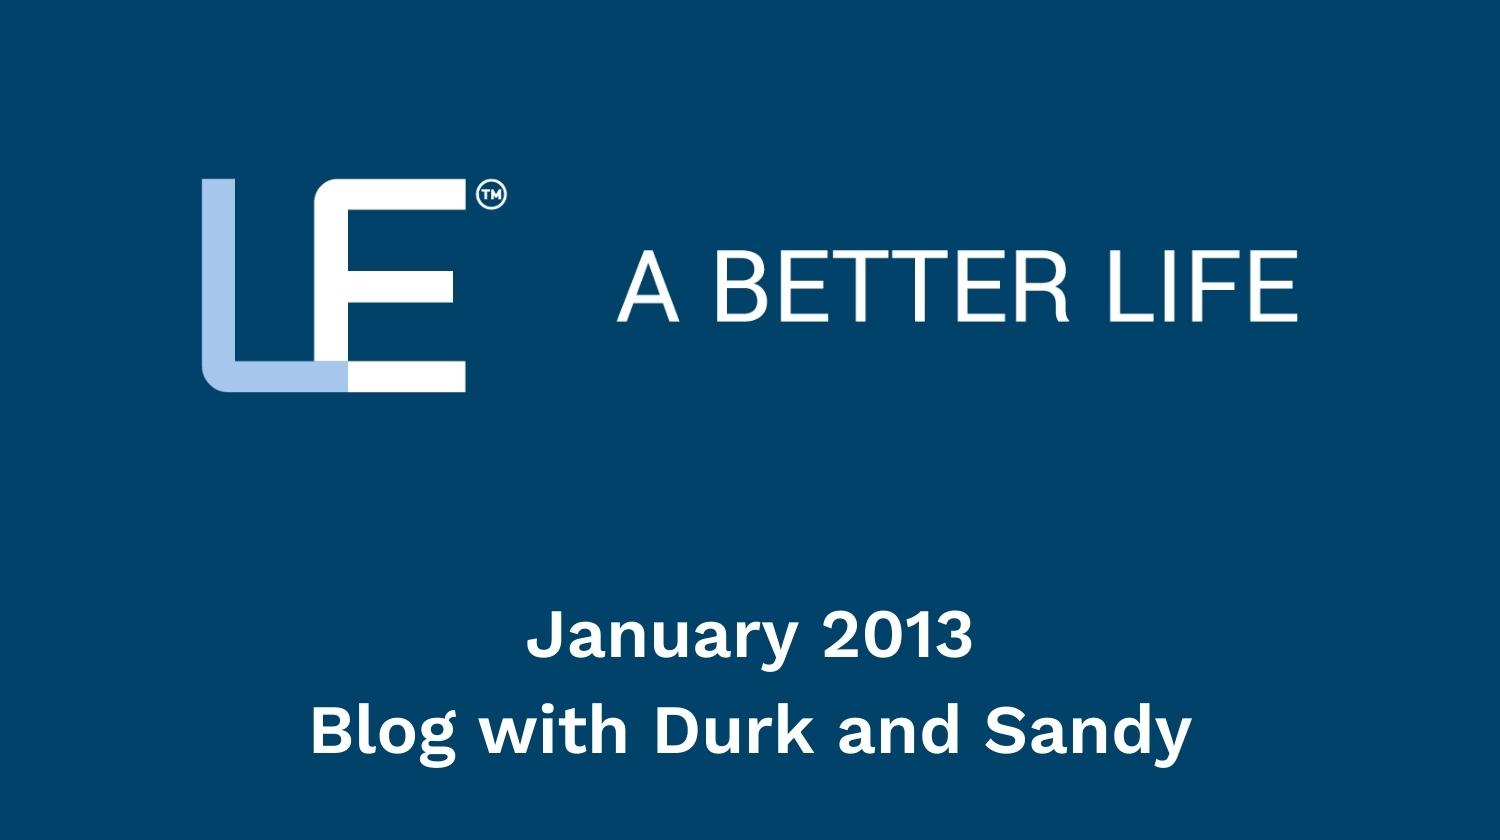 January 2013 Blog with Durk and Sandy